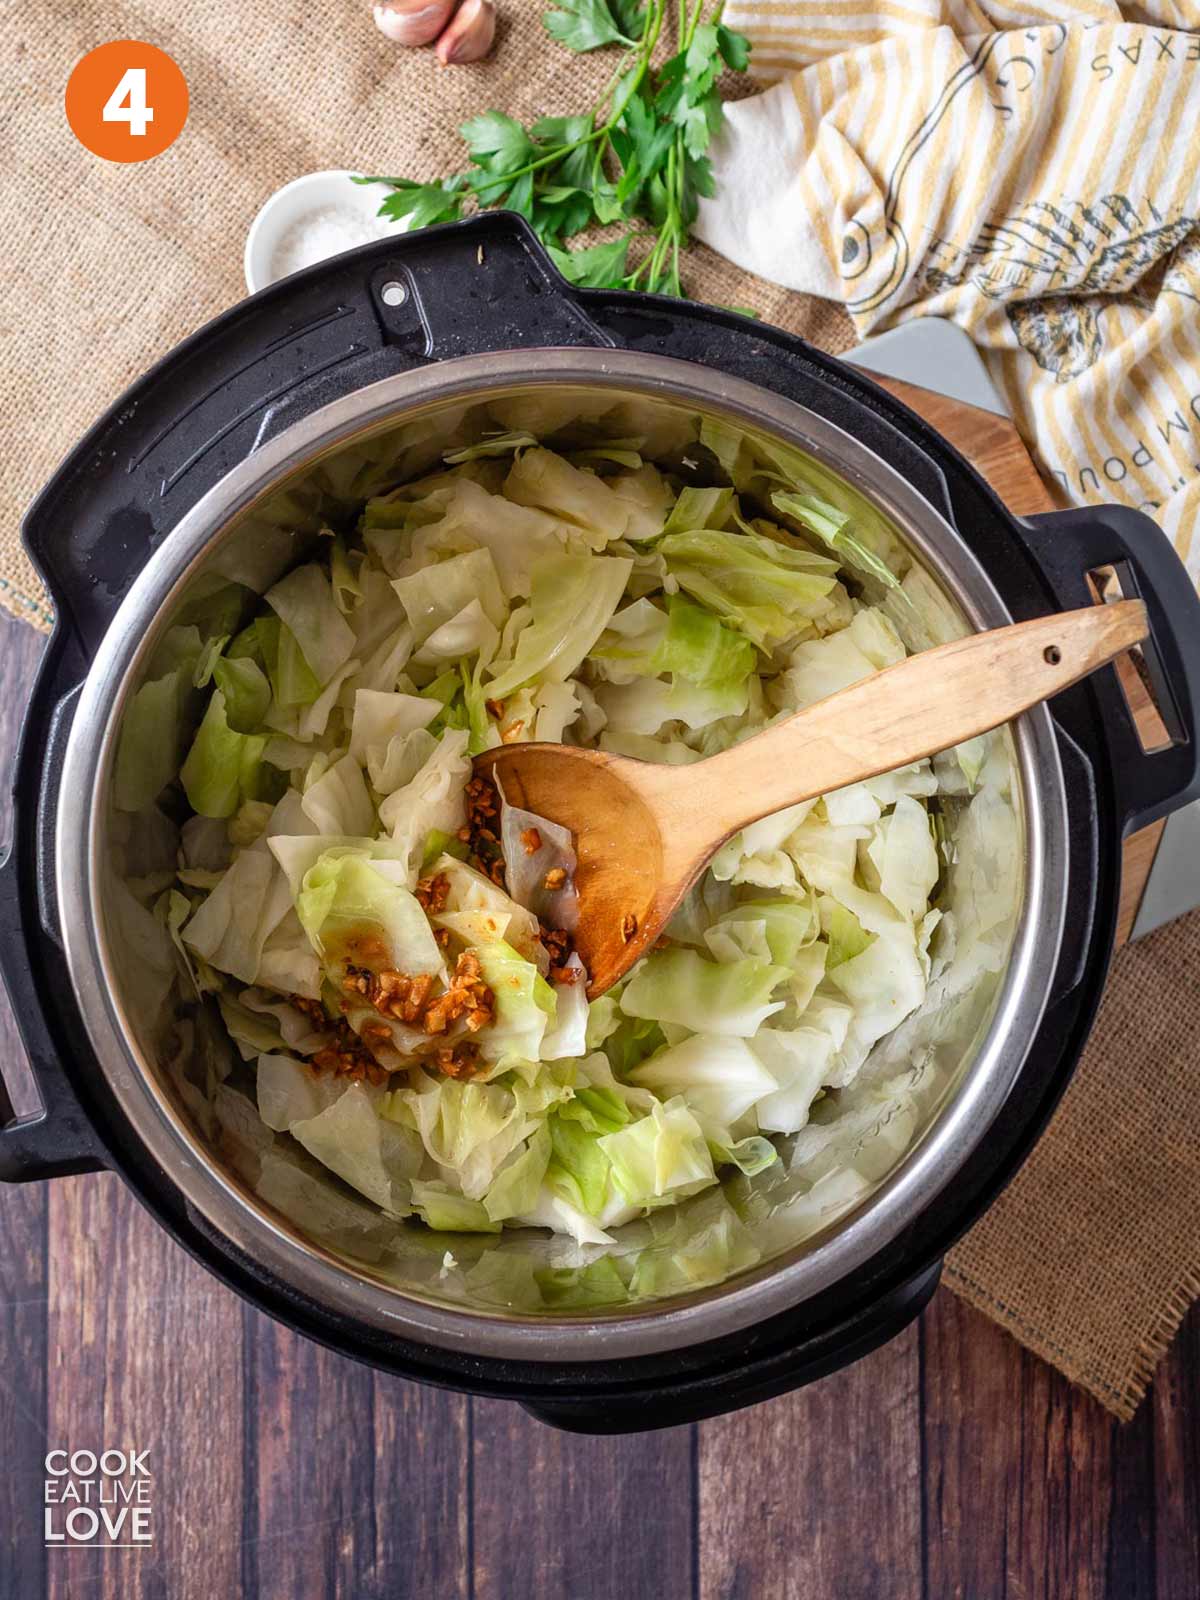 Steamed cabbage in the pressure cooker with garlic butter added.